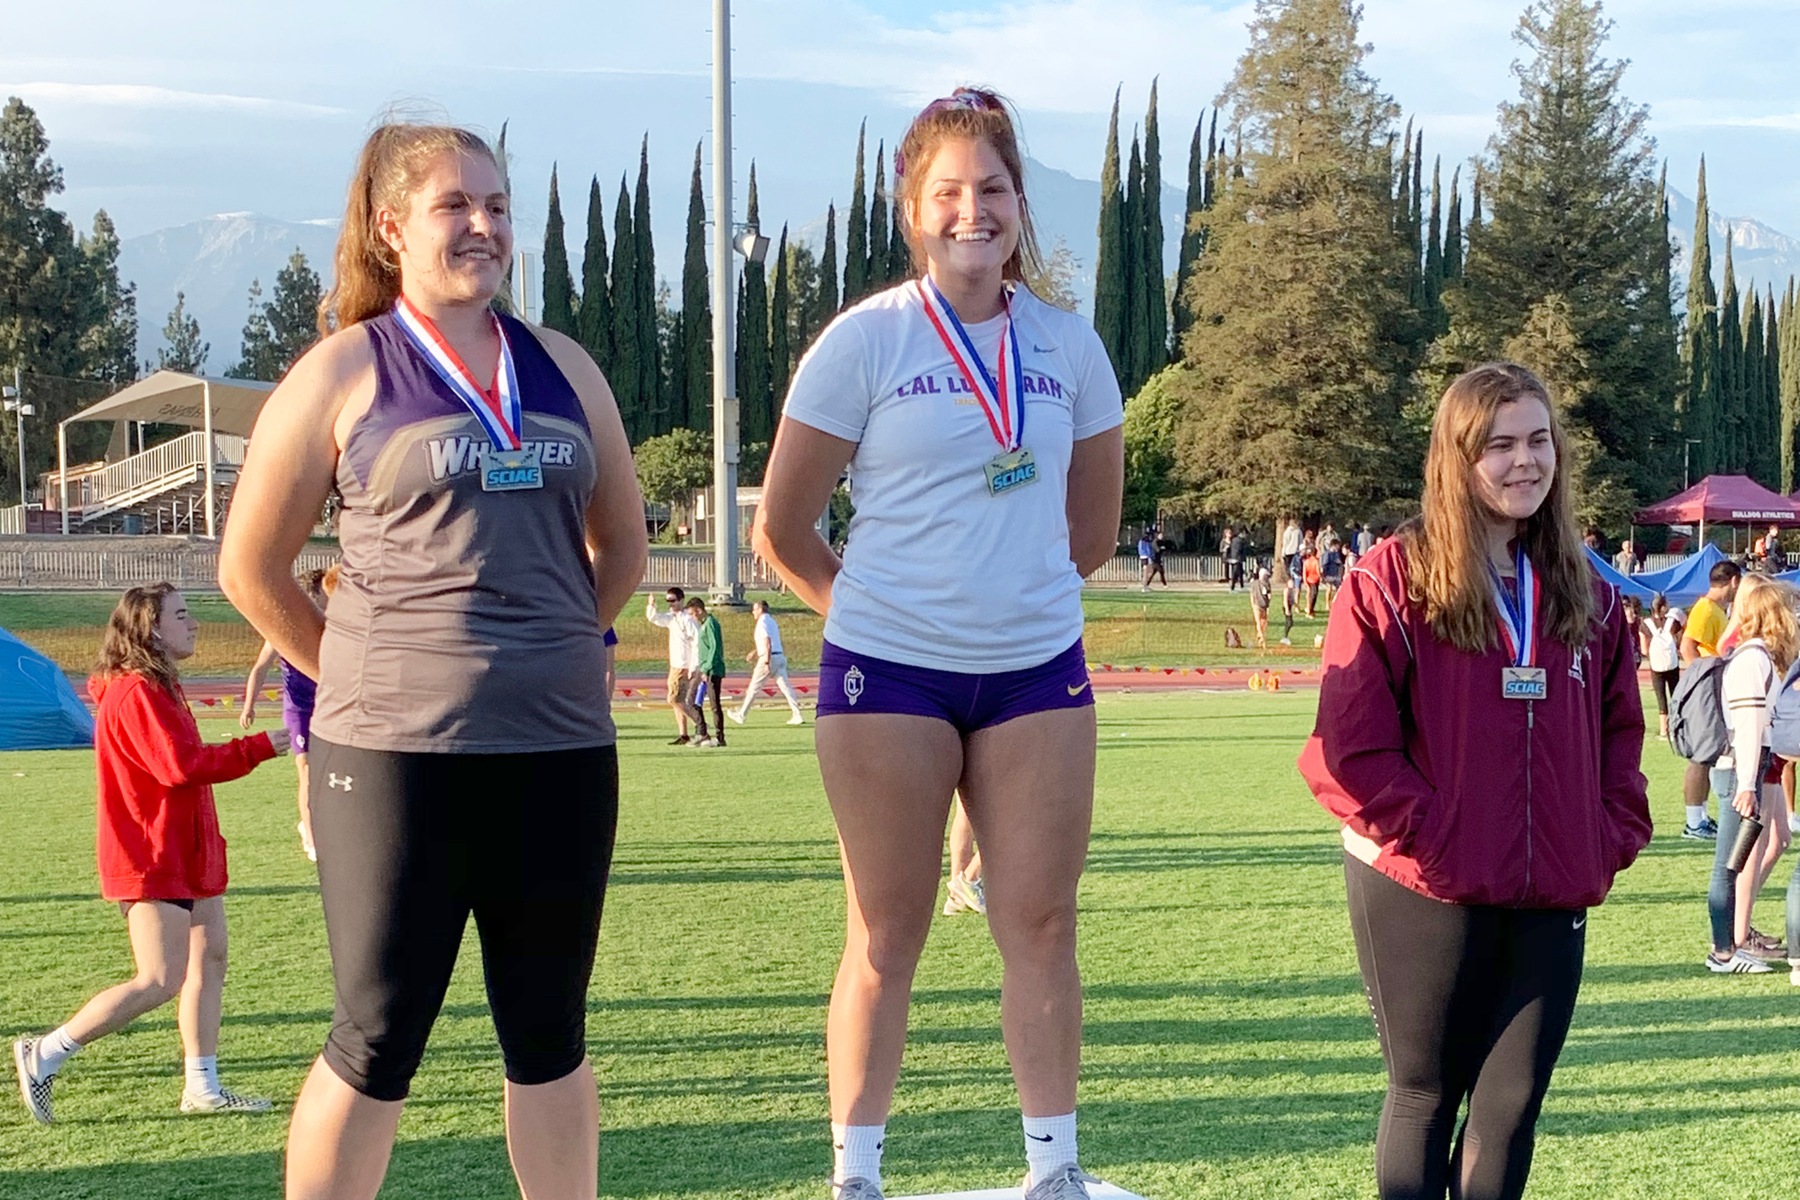 Barnes Takes Home Discus Title in SCIAC Championships Finale